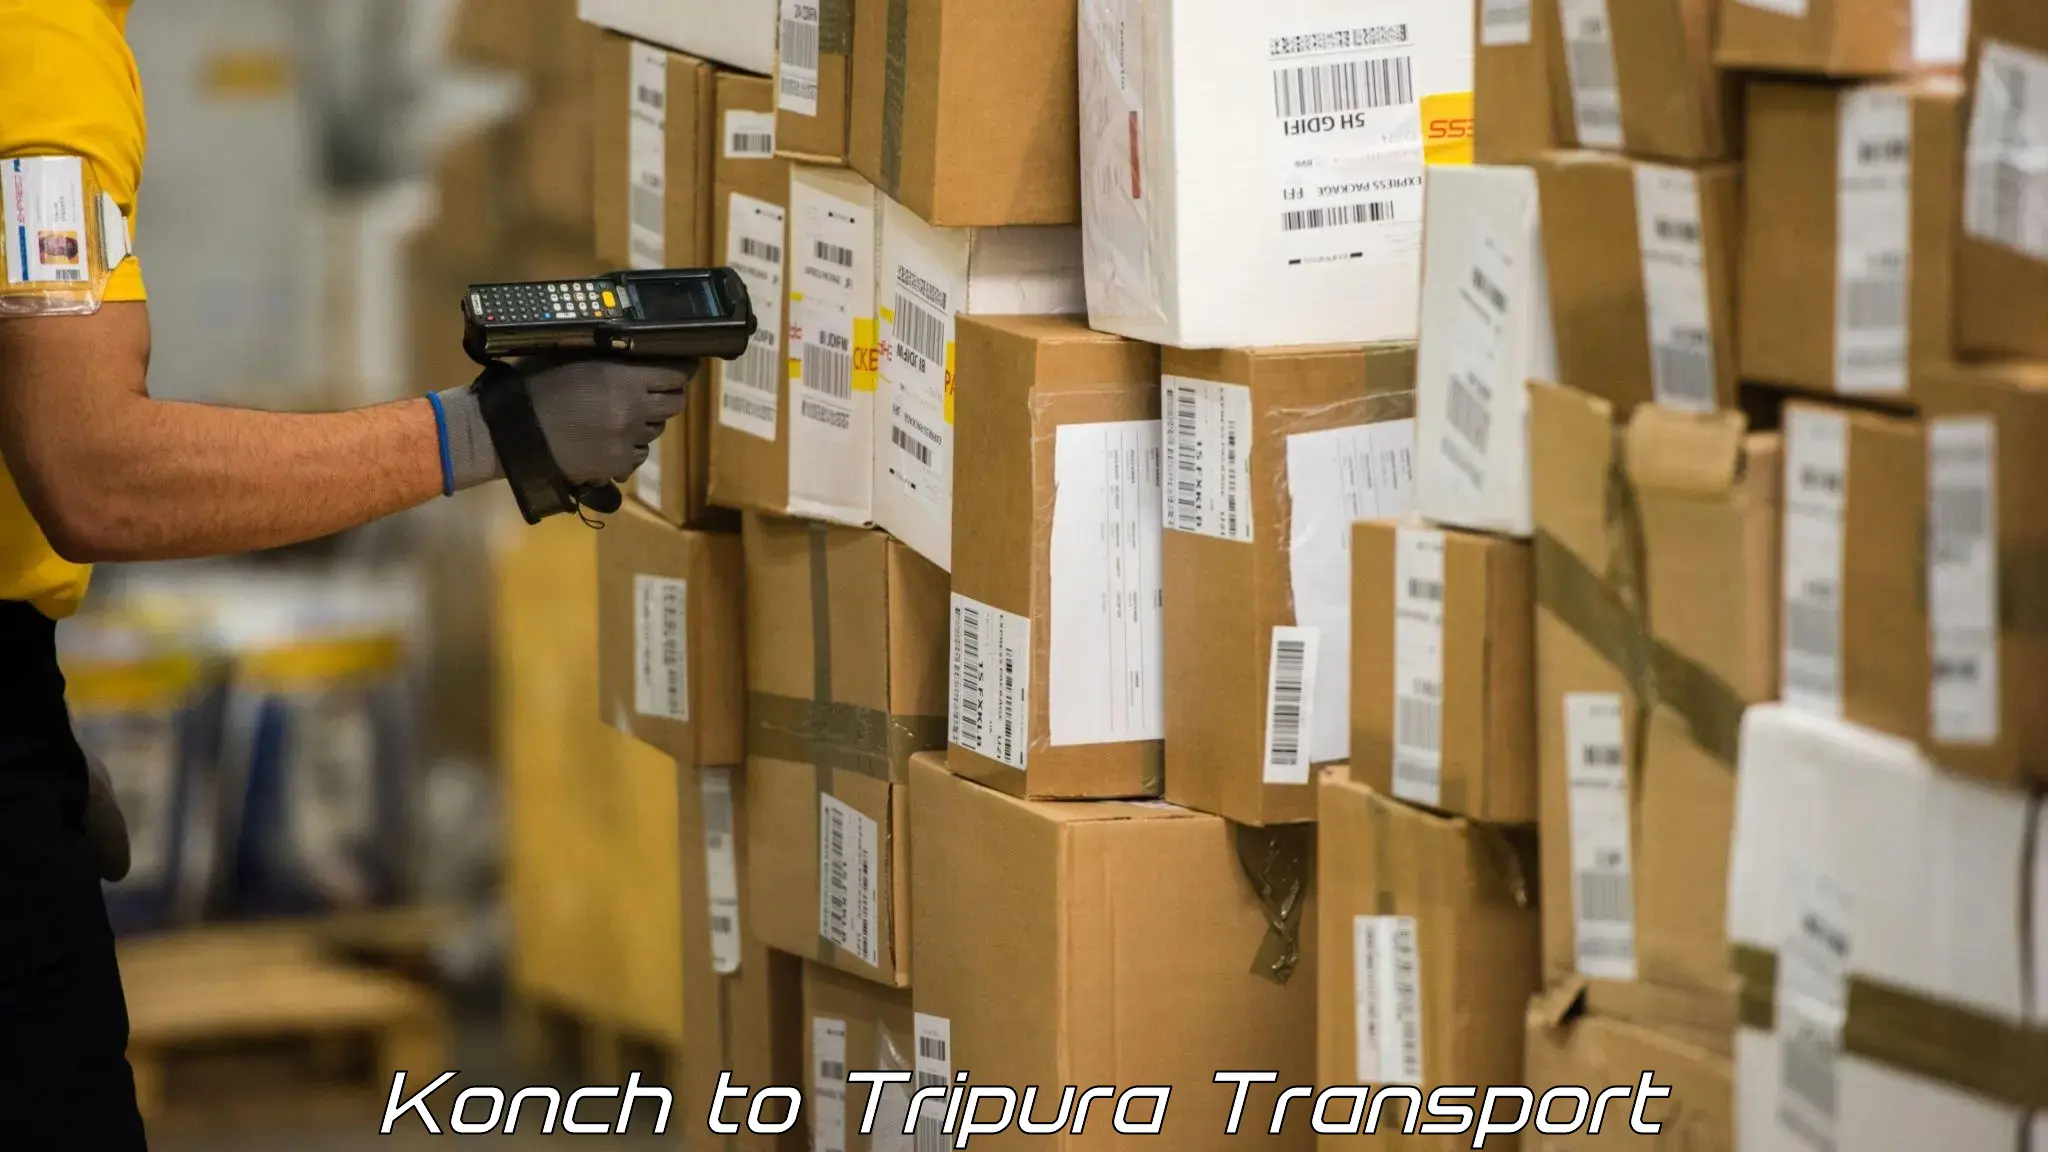 Road transport online services Konch to Tripura